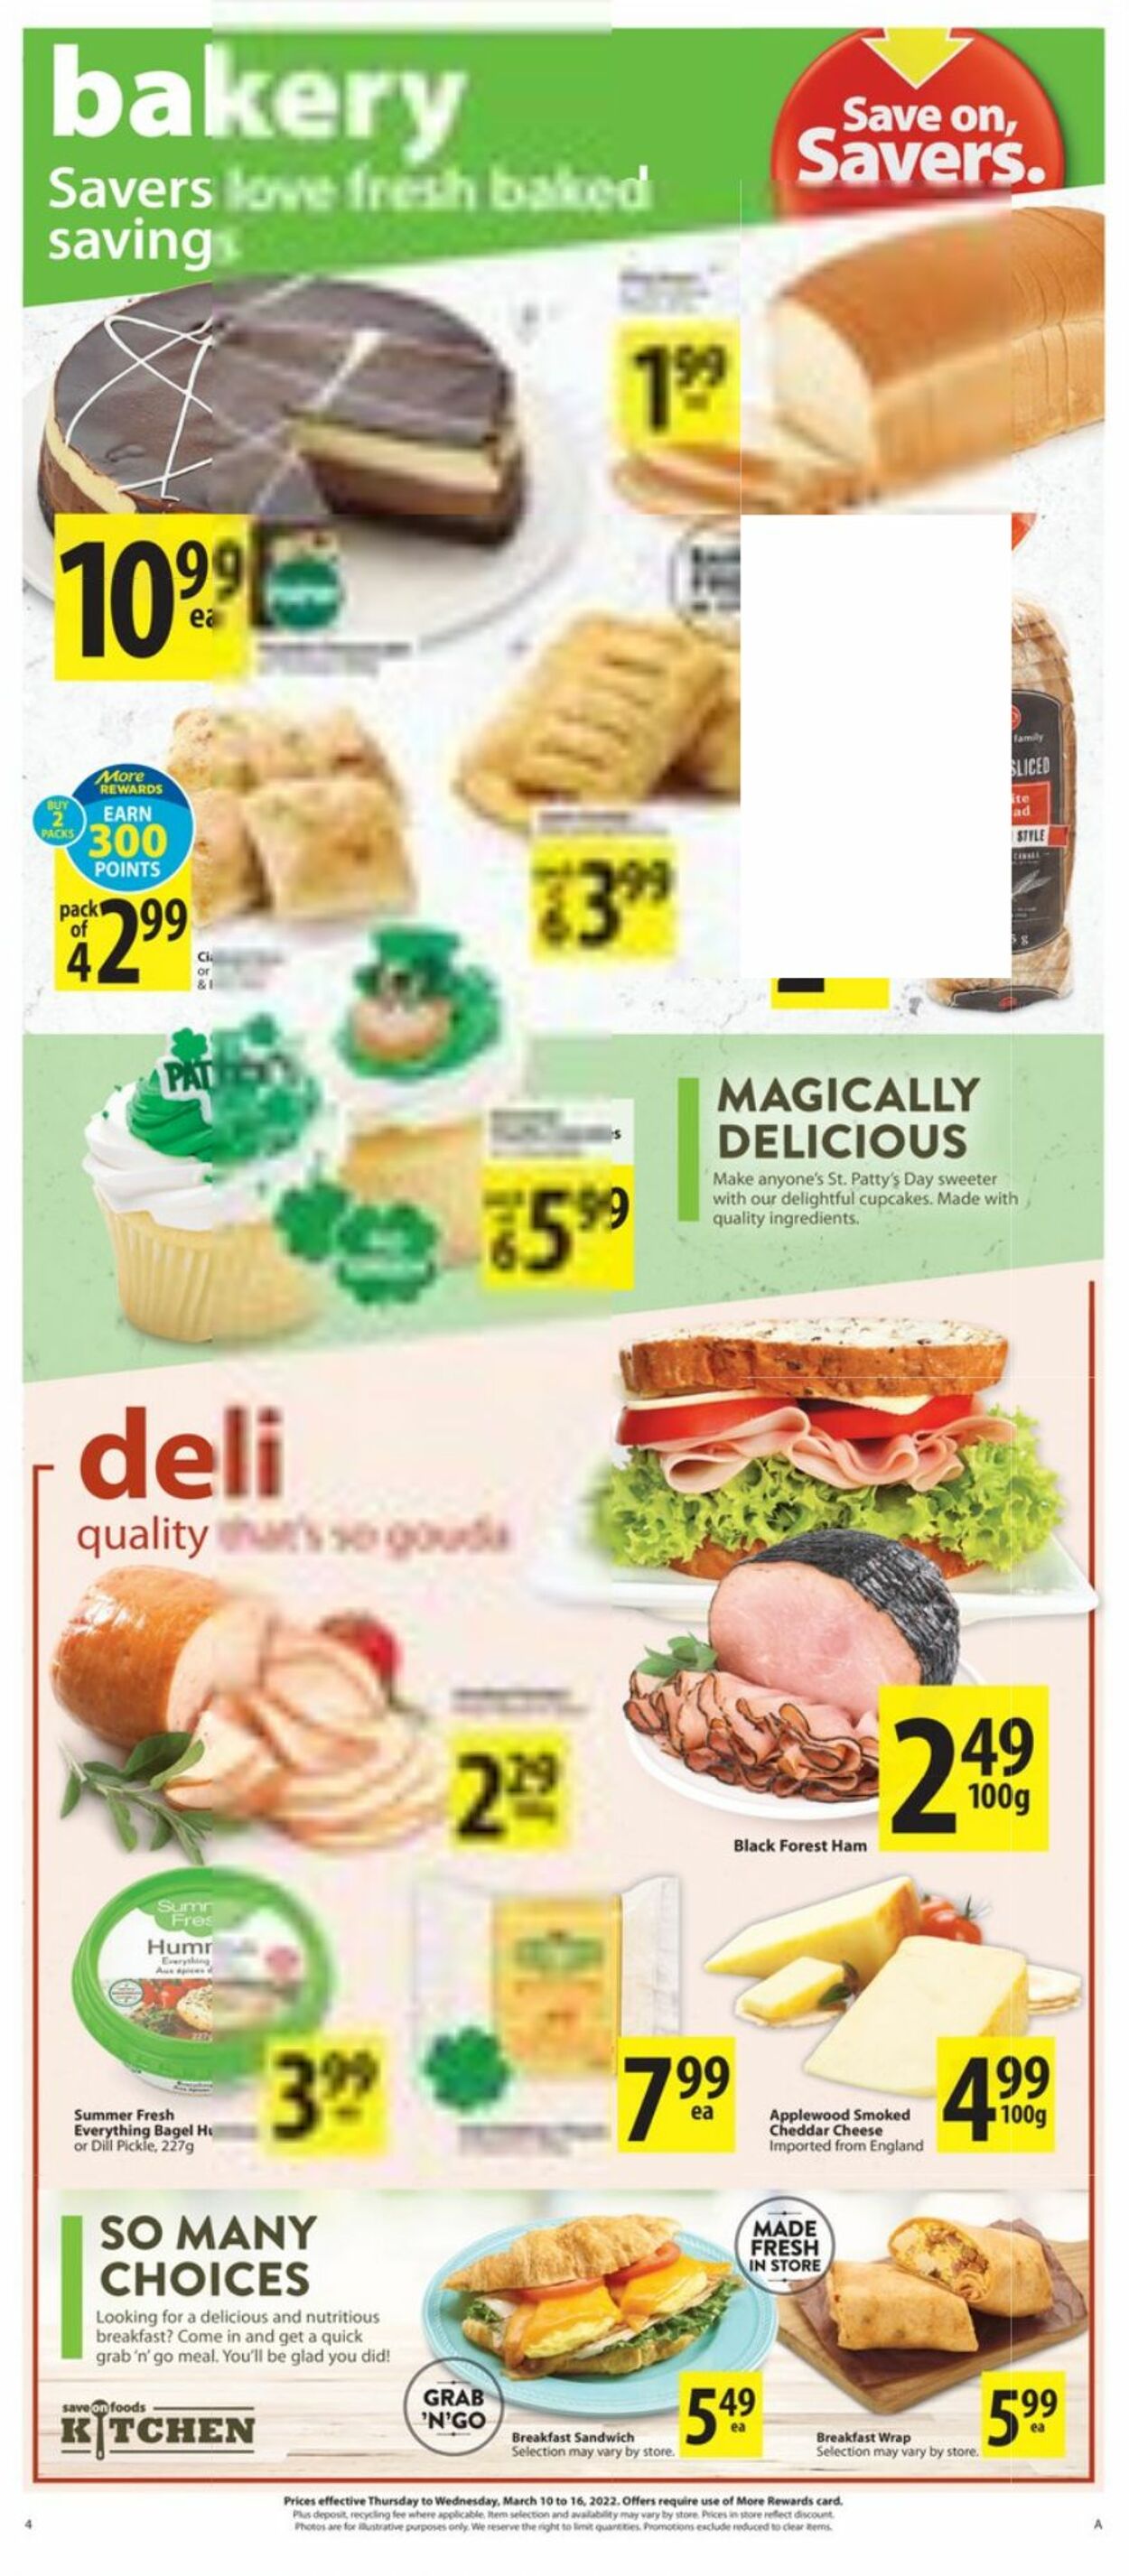 Flyer Save-On-Foods 10.03.2022 - 16.03.2022